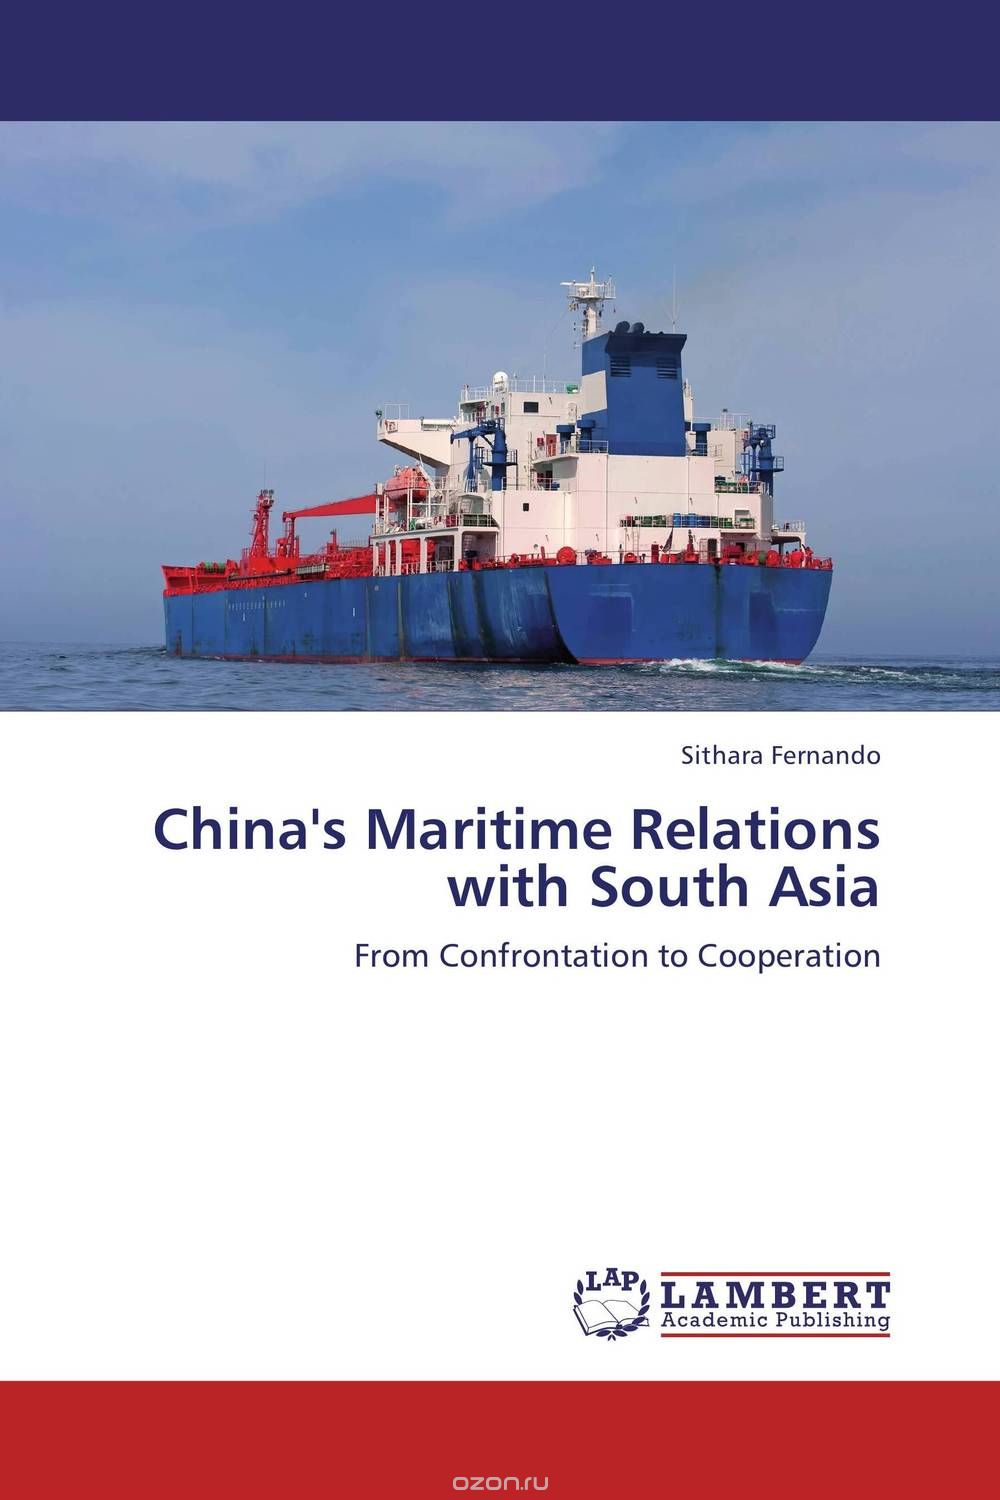 Скачать книгу "China's Maritime Relations with South Asia"